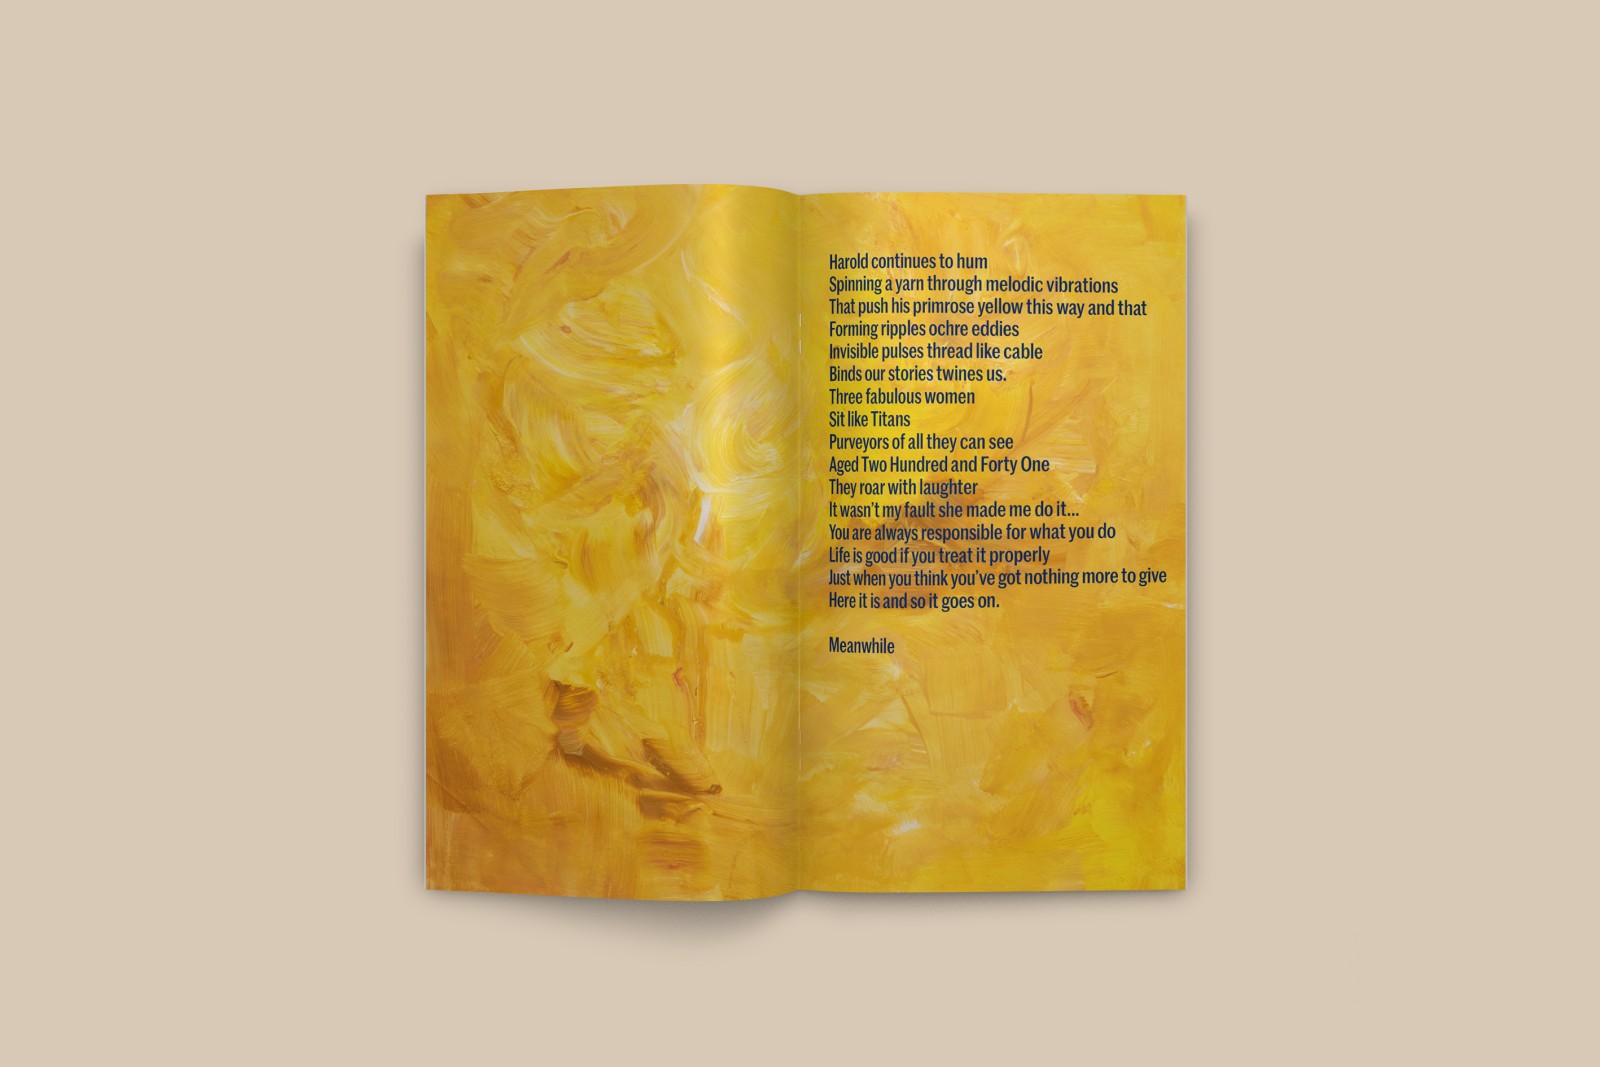 The Art of Here publication